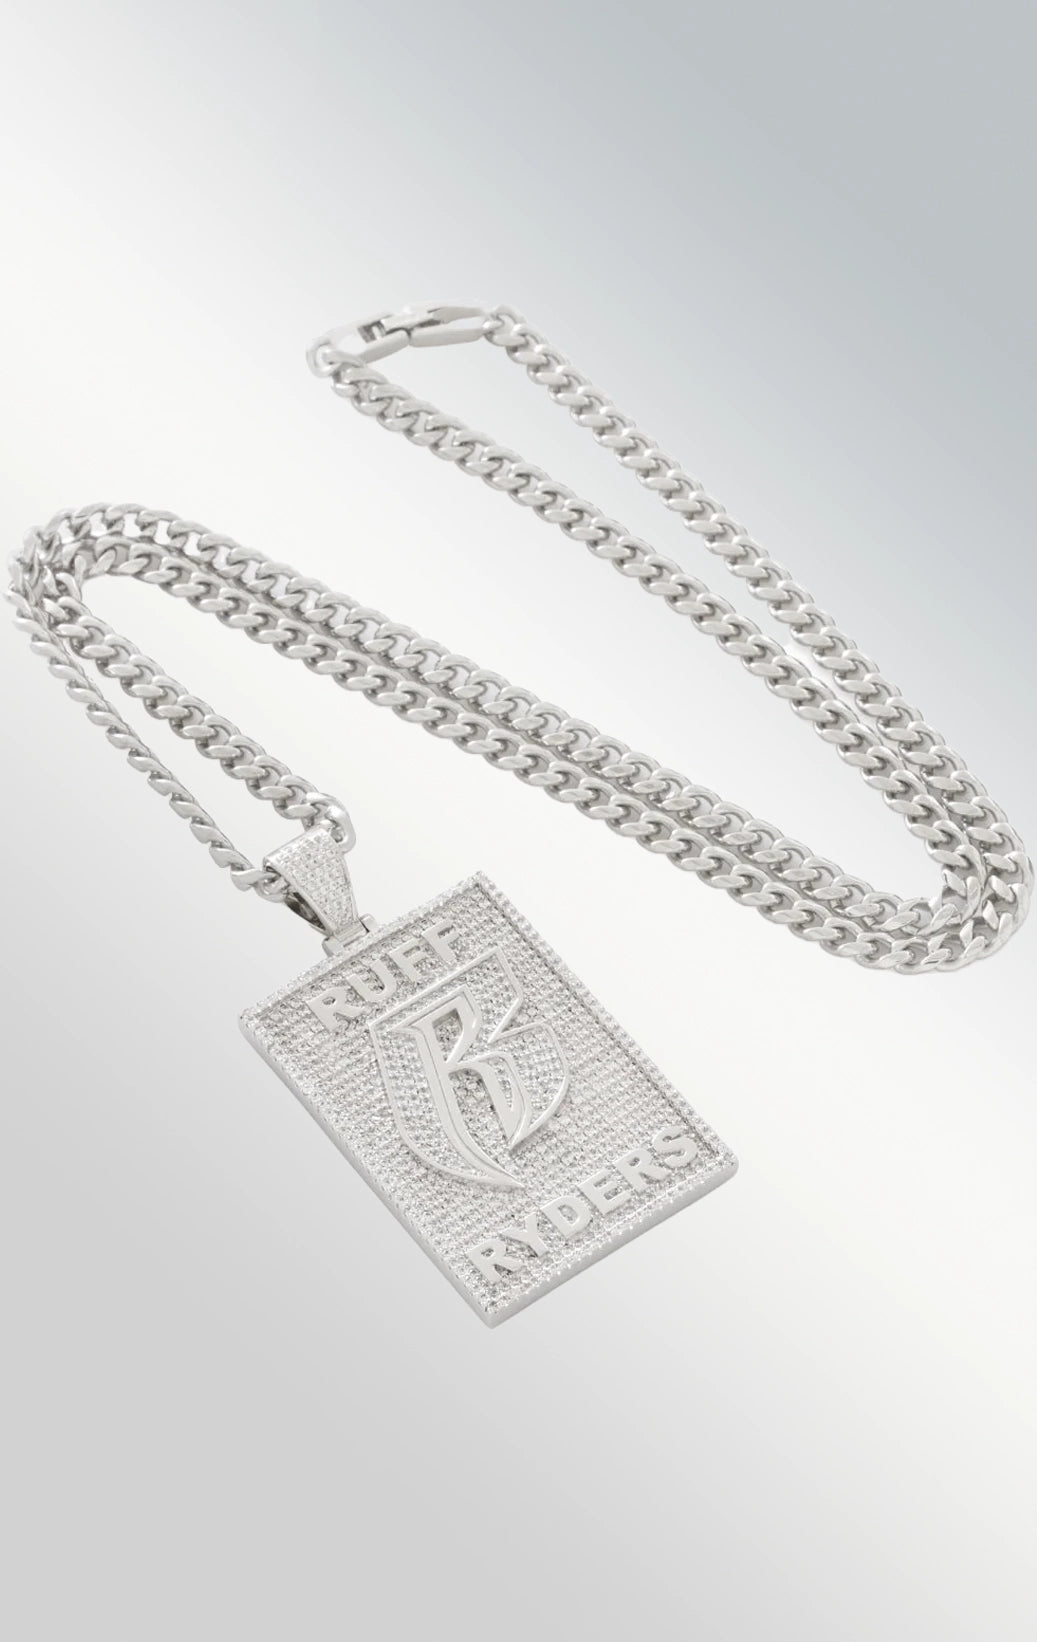 Dog tag ruff ryders pendant necklace in white gold